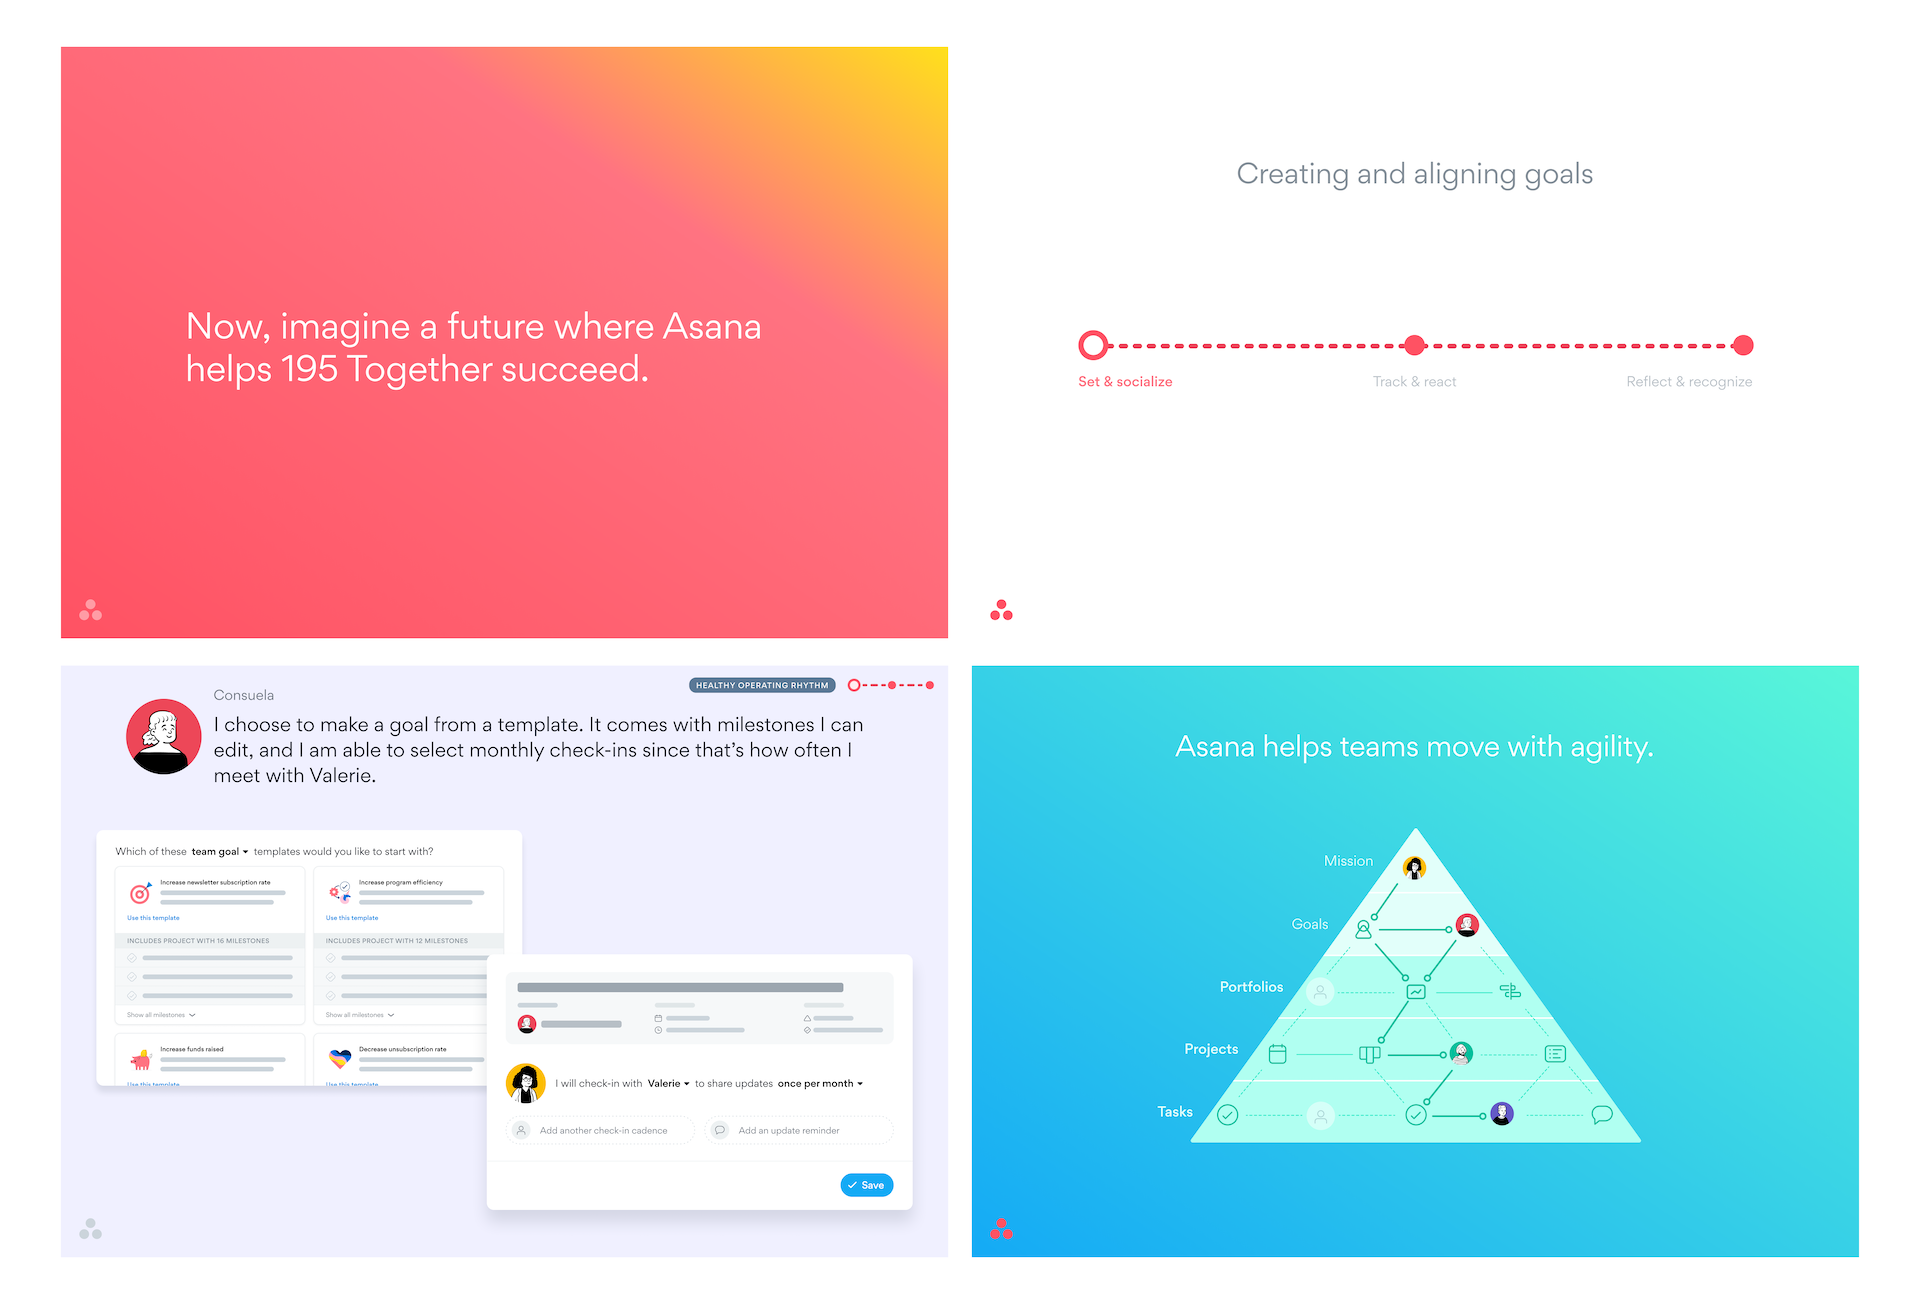 The second part of the design vision showed how a north star version of Asana Goals would help companies align their teams and move faster.